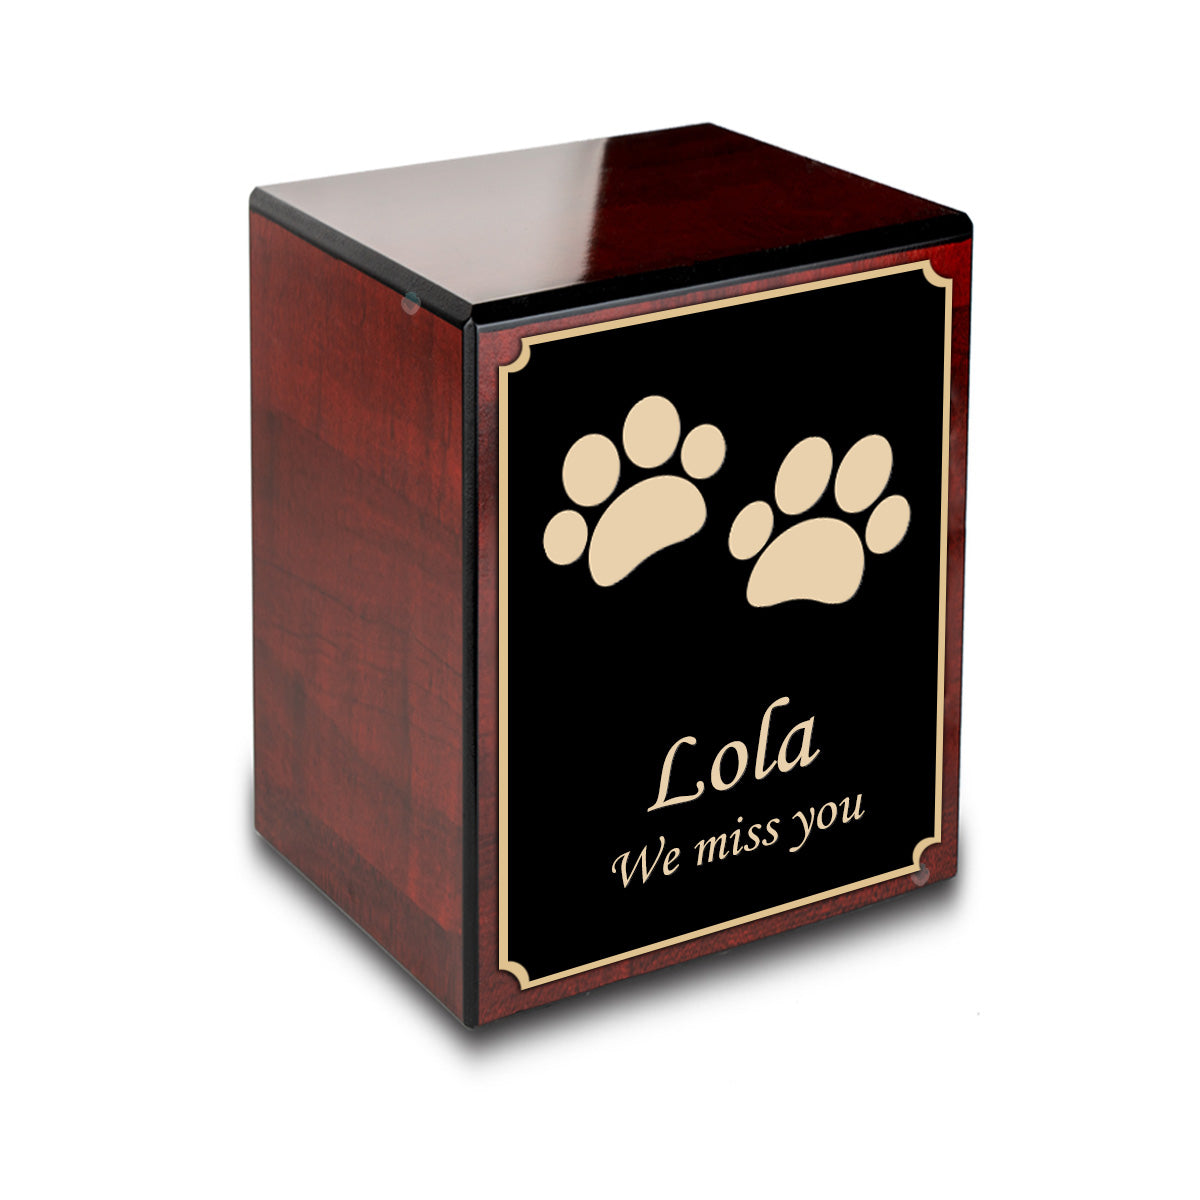 Custom Engraved Heritage Cherry Walking Paws Small Pet Cremation Urn Memorial Box for Ashes